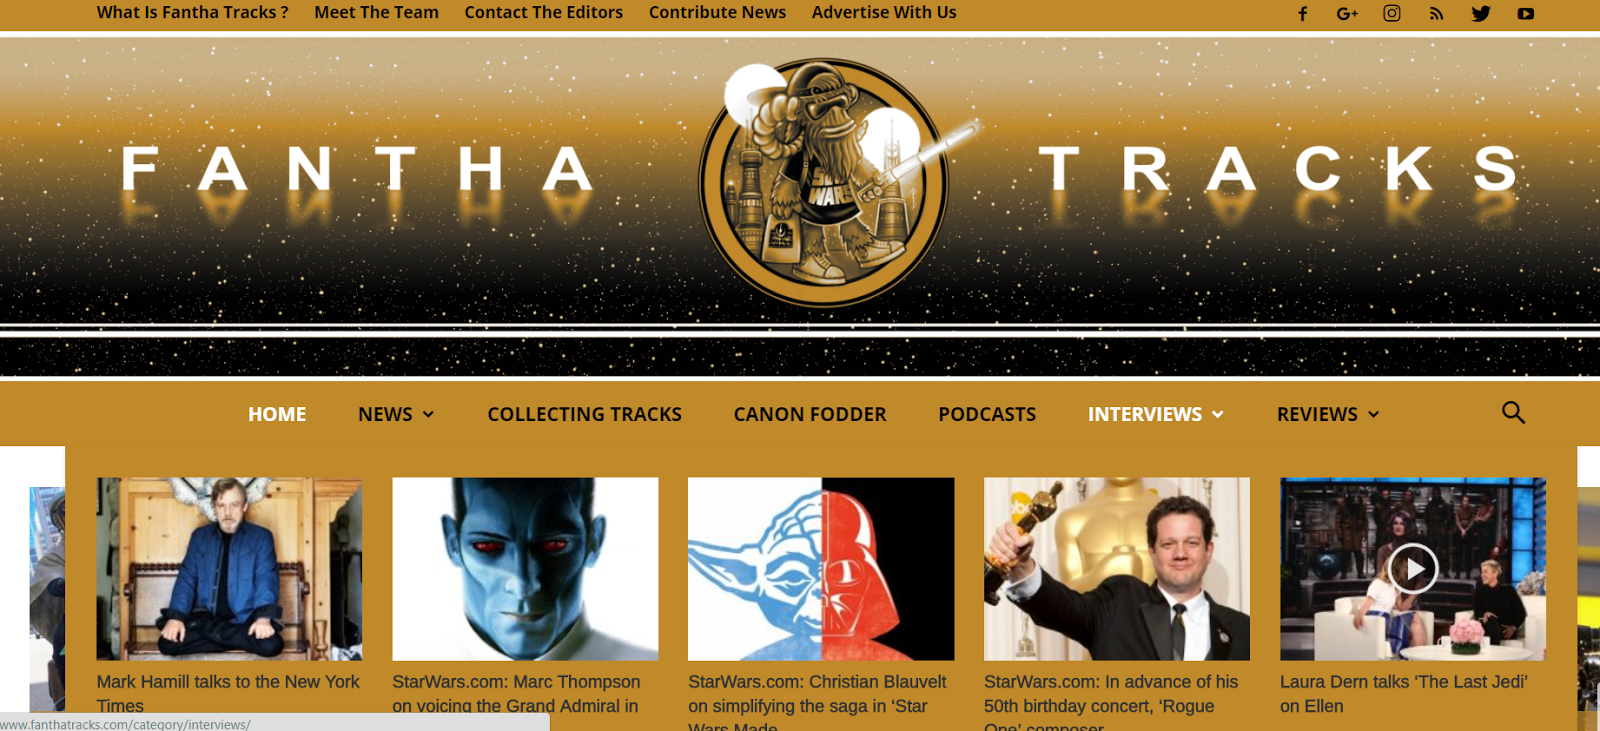 10 Awesome Gifts for Star Wars Fans - Fantha Tracks